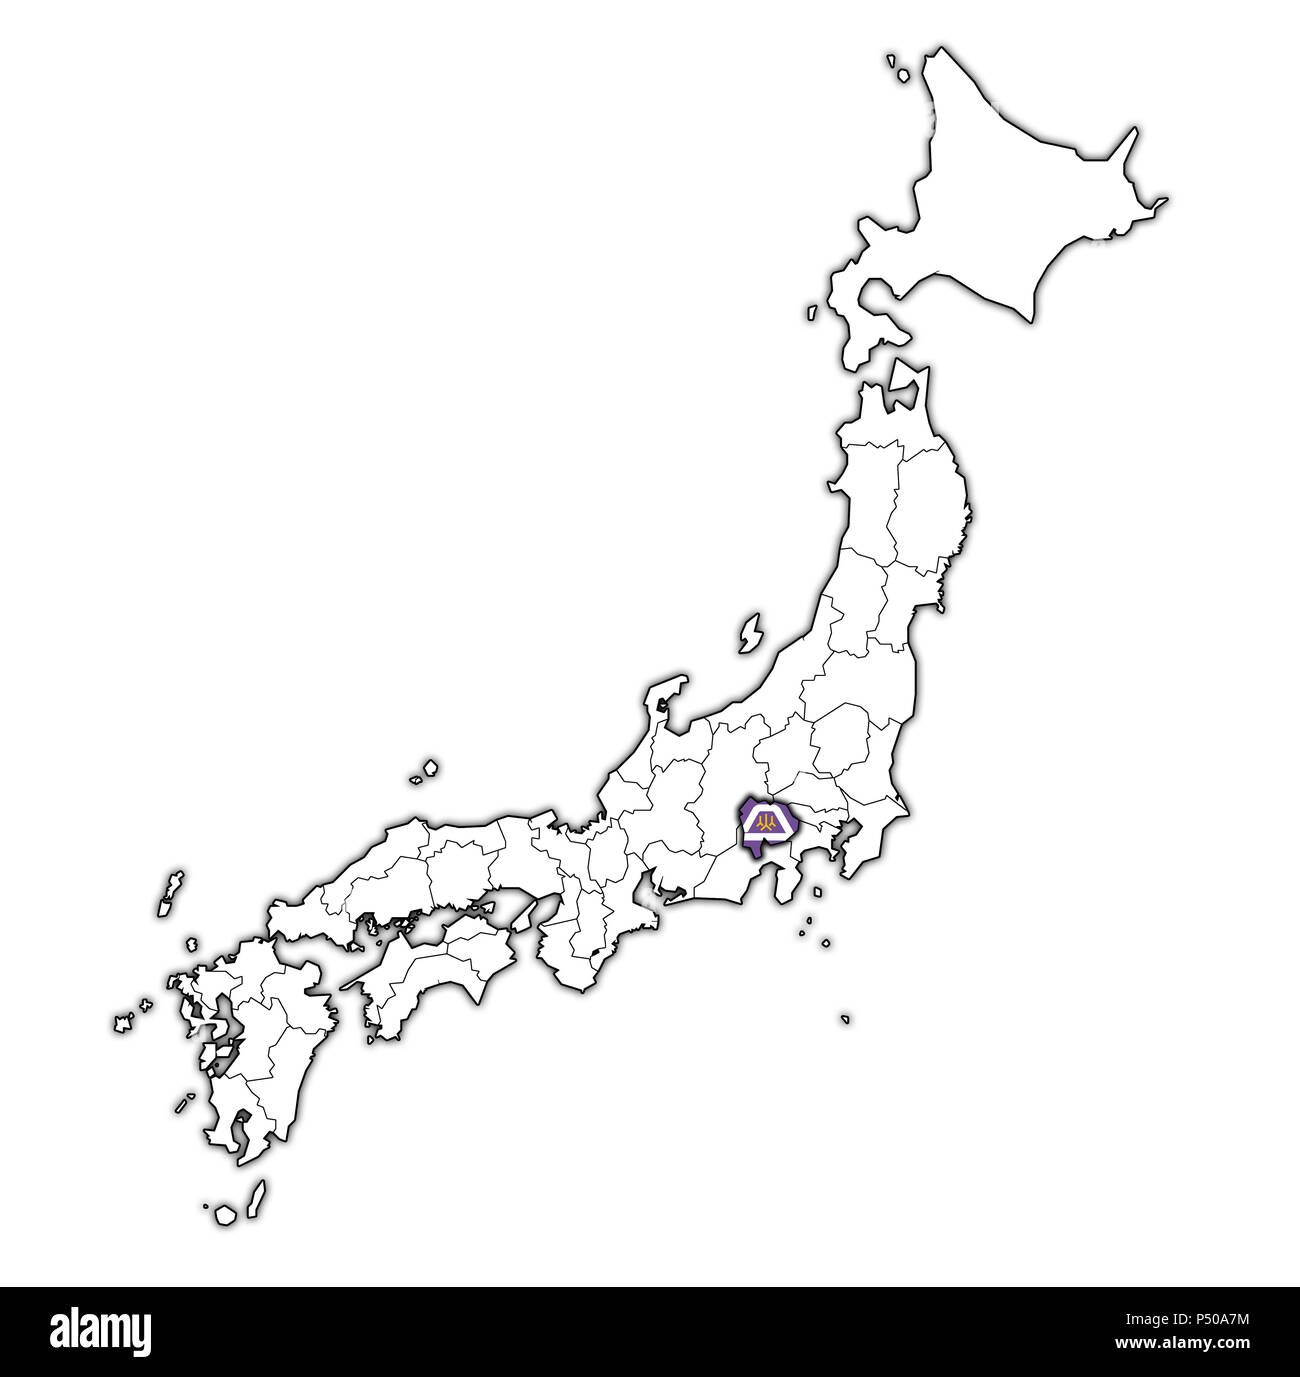 flag of yamanashi prefecture on map with administrative divisions and borders of japan Stock Photo